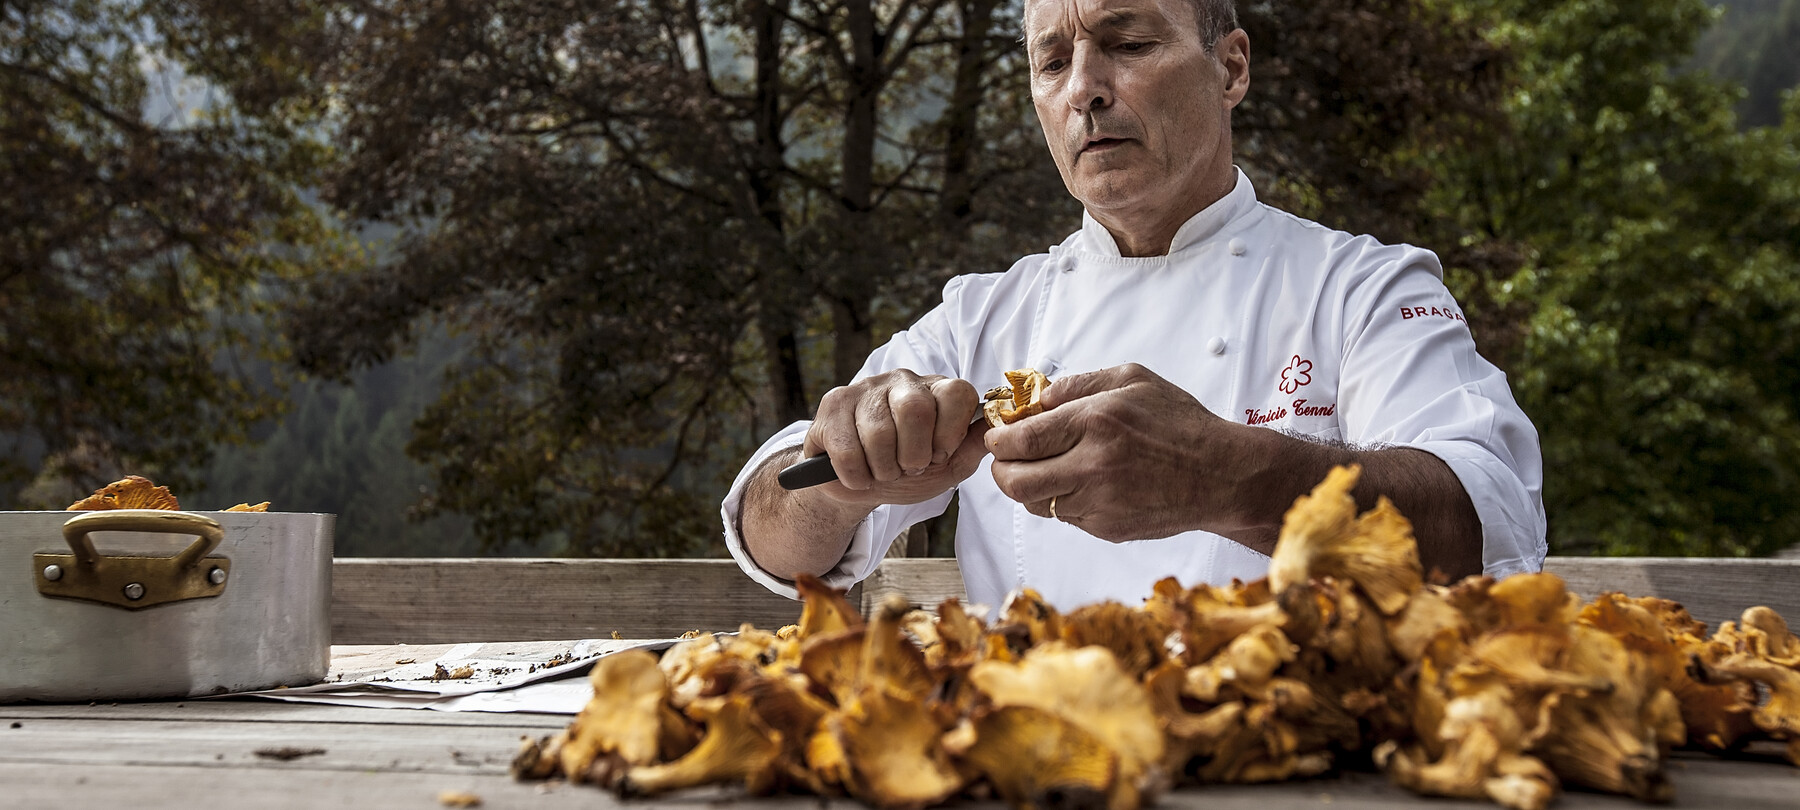 Mushroom cleaning - What to eat in Trentino in the autumn